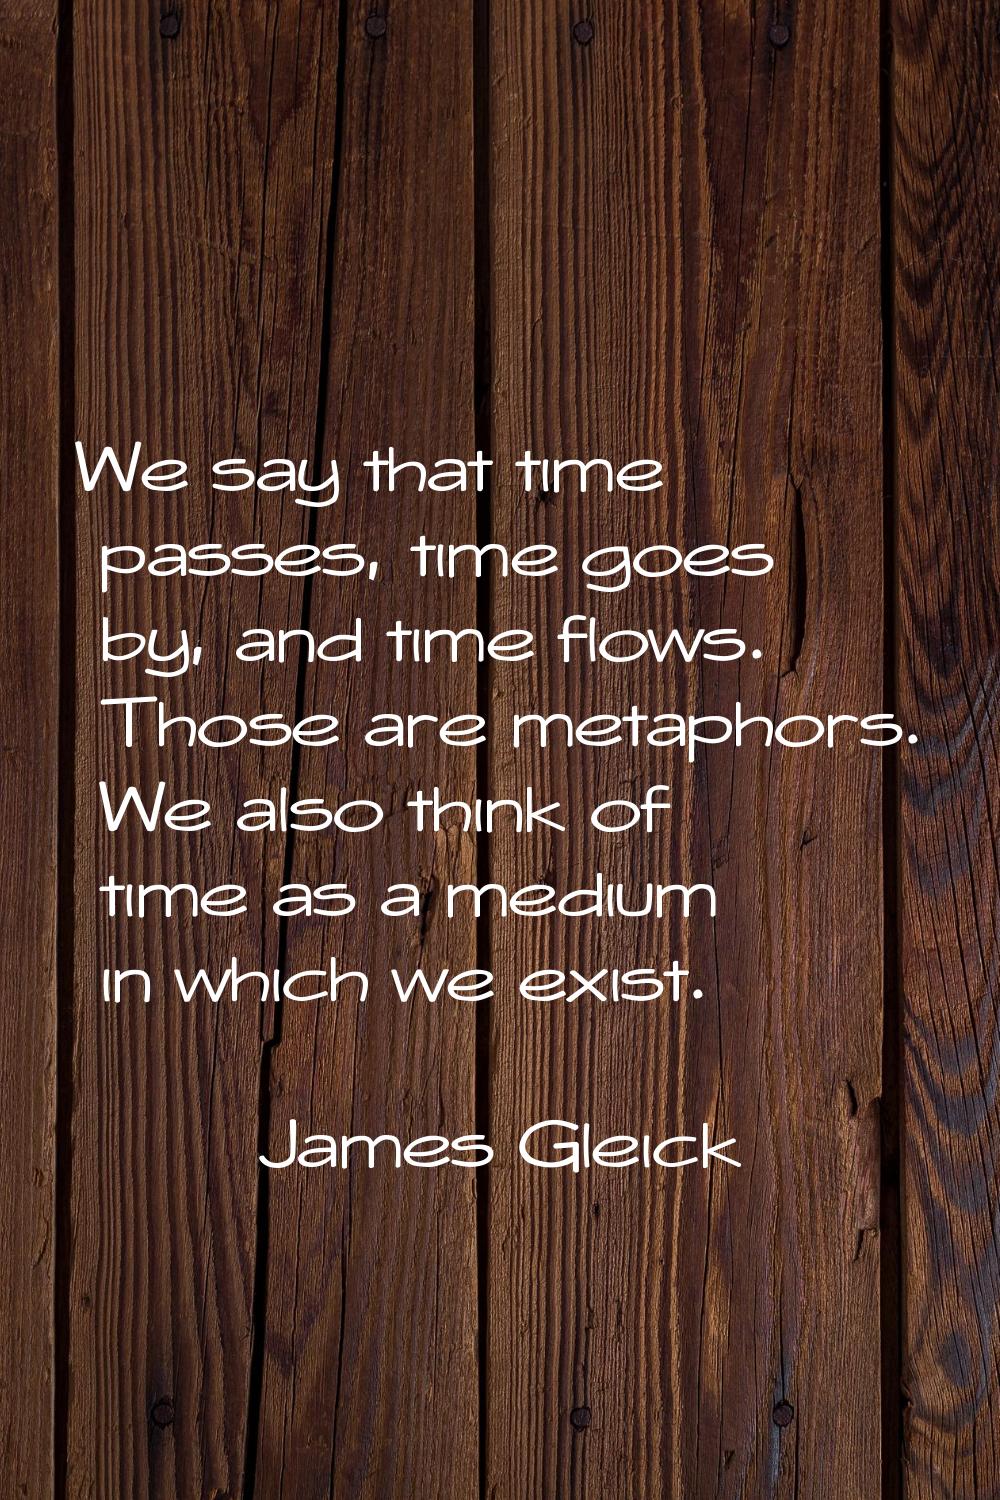 We say that time passes, time goes by, and time flows. Those are metaphors. We also think of time a